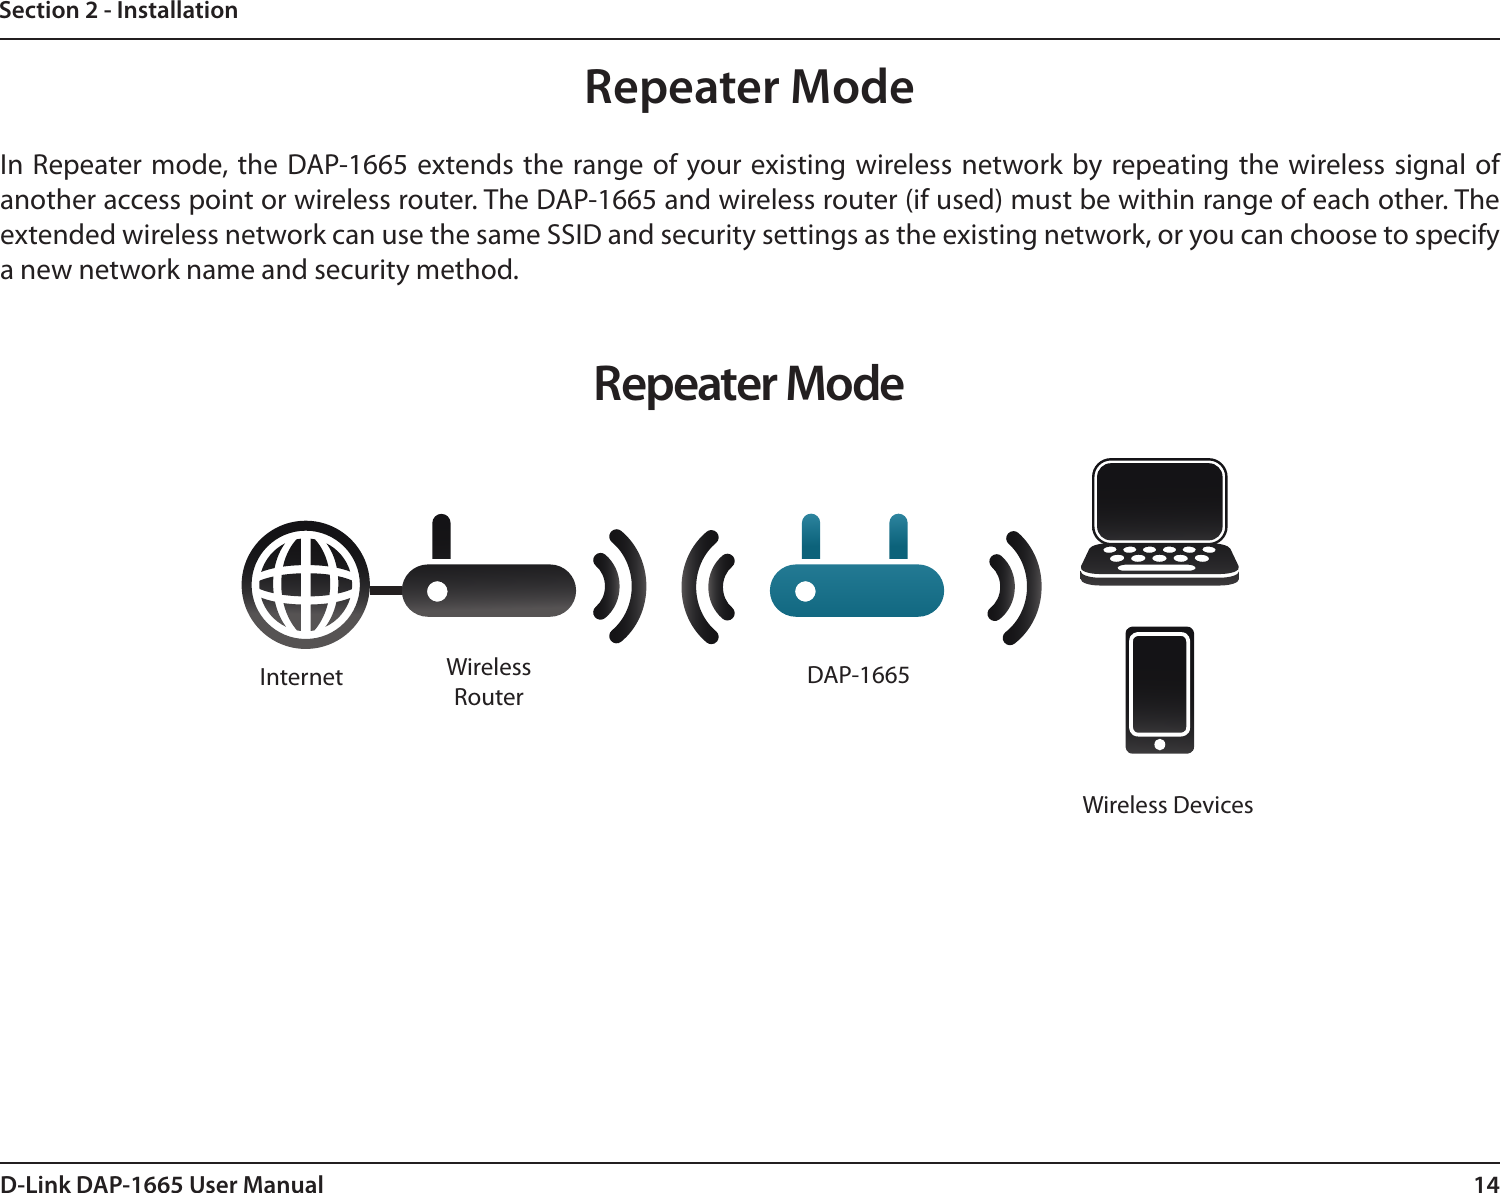 14D-Link DAP-1665 User ManualSection 2 - InstallationRepeater ModeIn Repeater mode, the DAP-1665 extends the  range of your existing wireless network by repeating the wireless signal of another access point or wireless router. The DAP-1665 and wireless router (if used) must be within range of each other. The extended wireless network can use the same SSID and security settings as the existing network, or you can choose to specify a new network name and security method.Repeater ModeInternet DAP-1665Wireless RouterWireless Devices